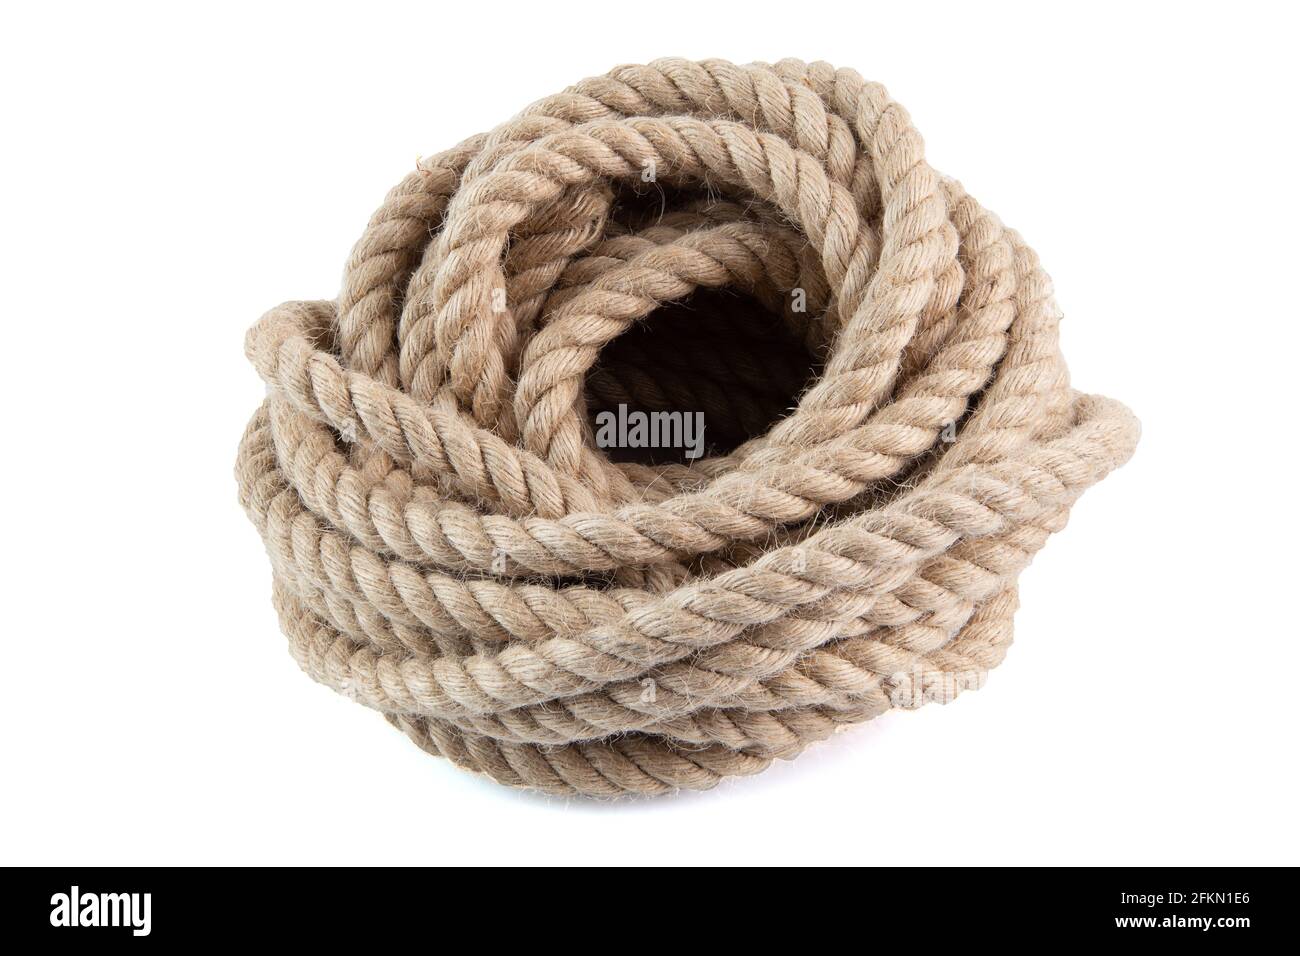 coil of natural 10 mm Jute Hessian Rope Cord Braided Twisted isolated on white background. Stock Photo